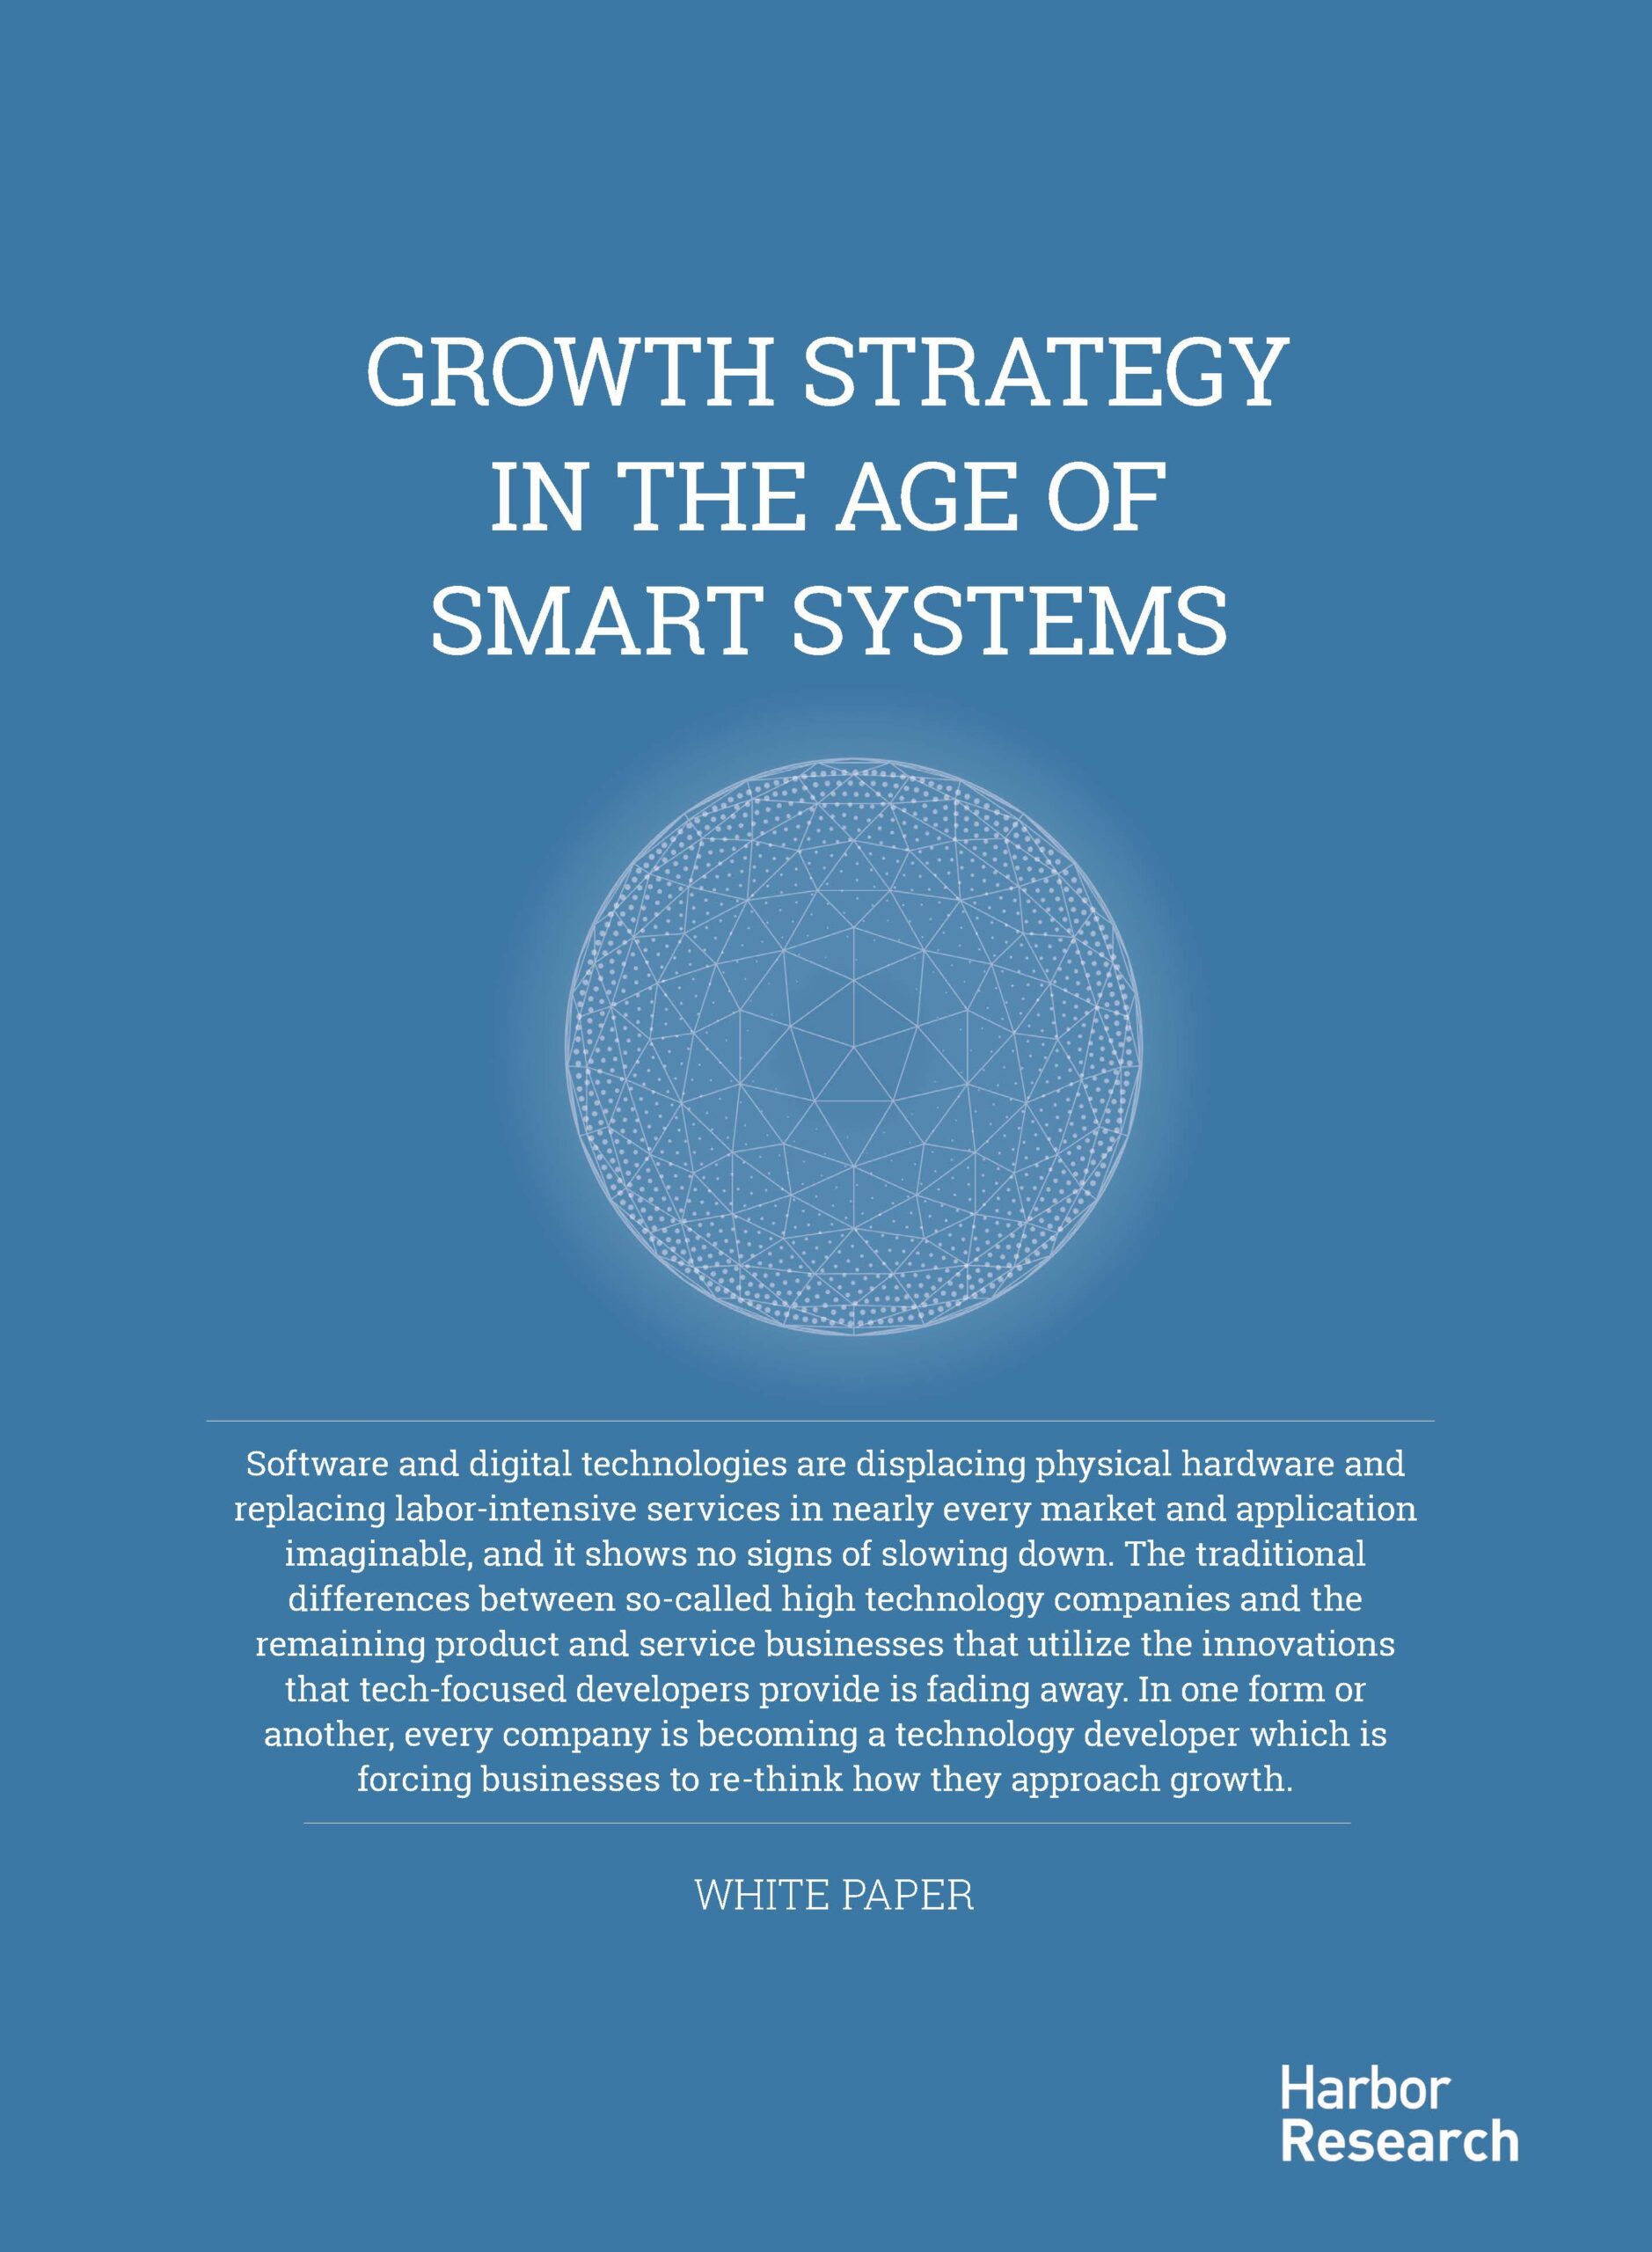 Harbor Research White Paper | Growth Strategy in the Age of Smart Systems